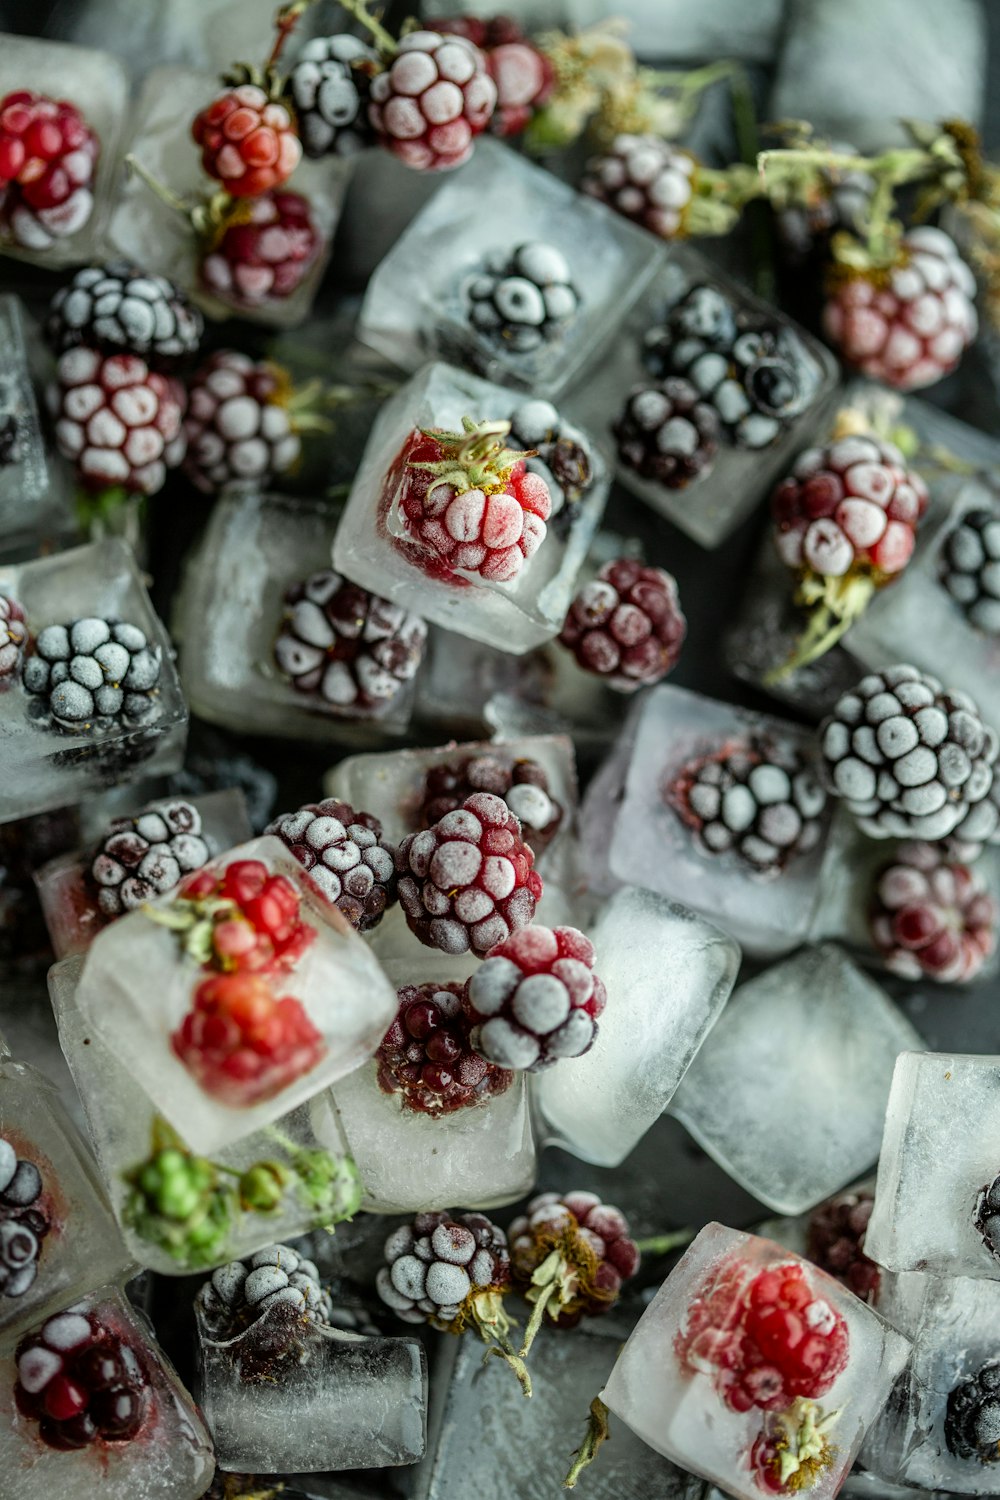 red and white round fruits on clear glass container